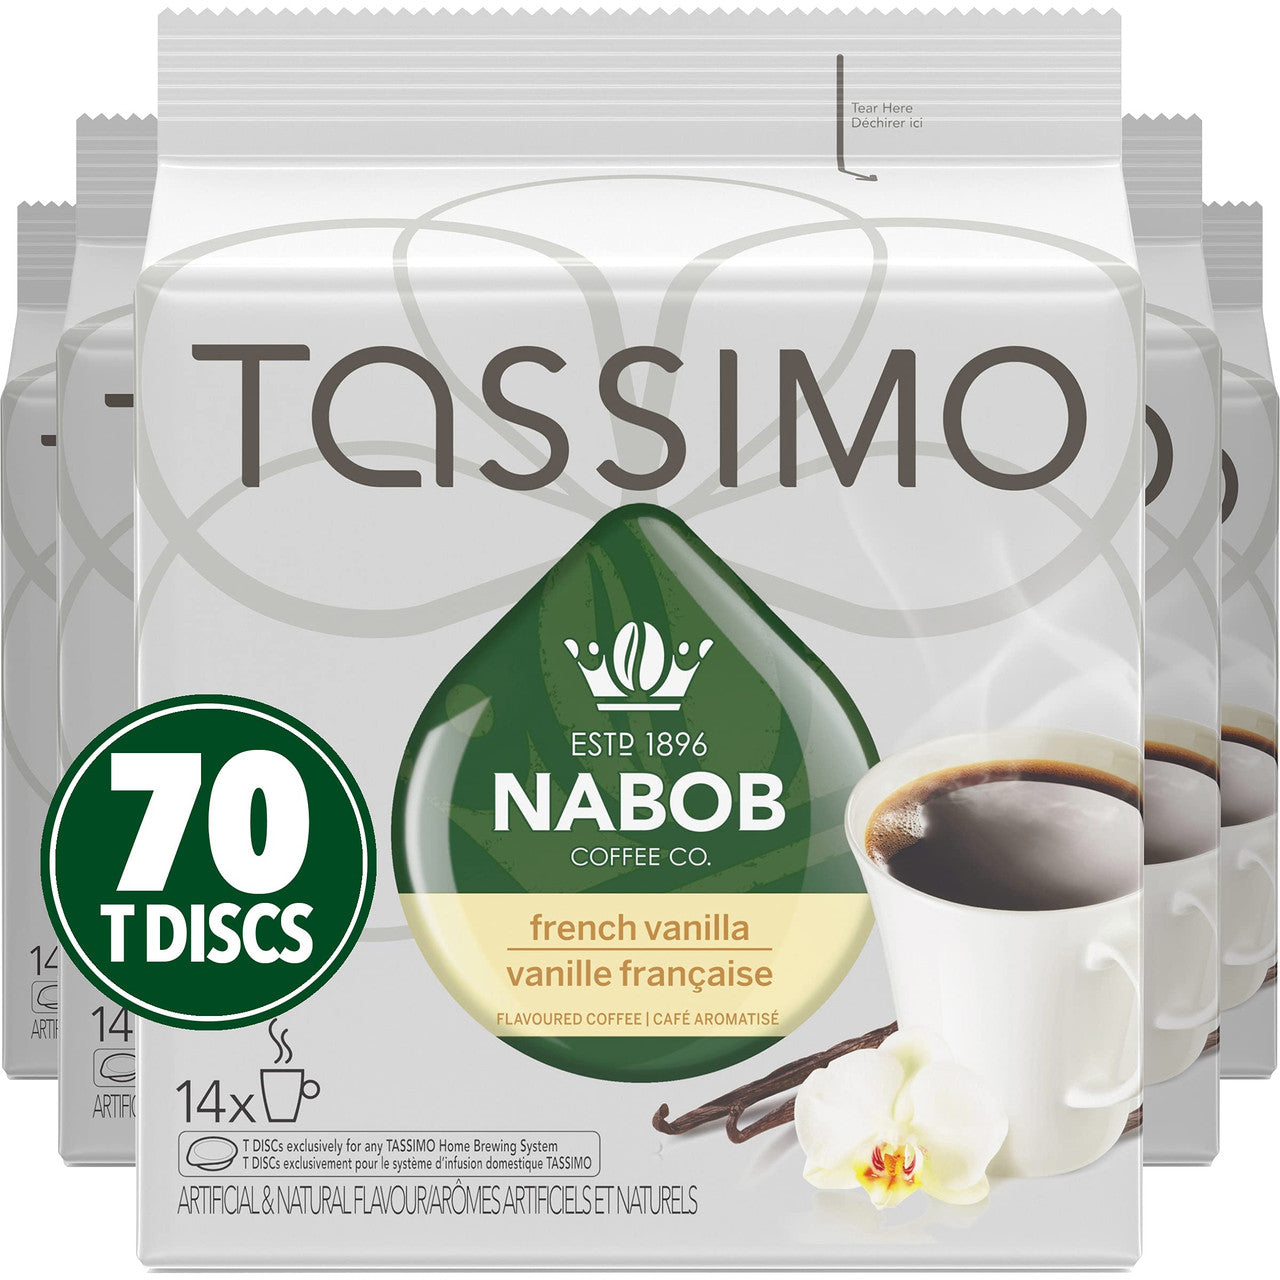 Tassimo Nabob Coffee French Vanilla, 70 T-Discs (5 Boxes of 14 T-Discs) {Imported from Canada}